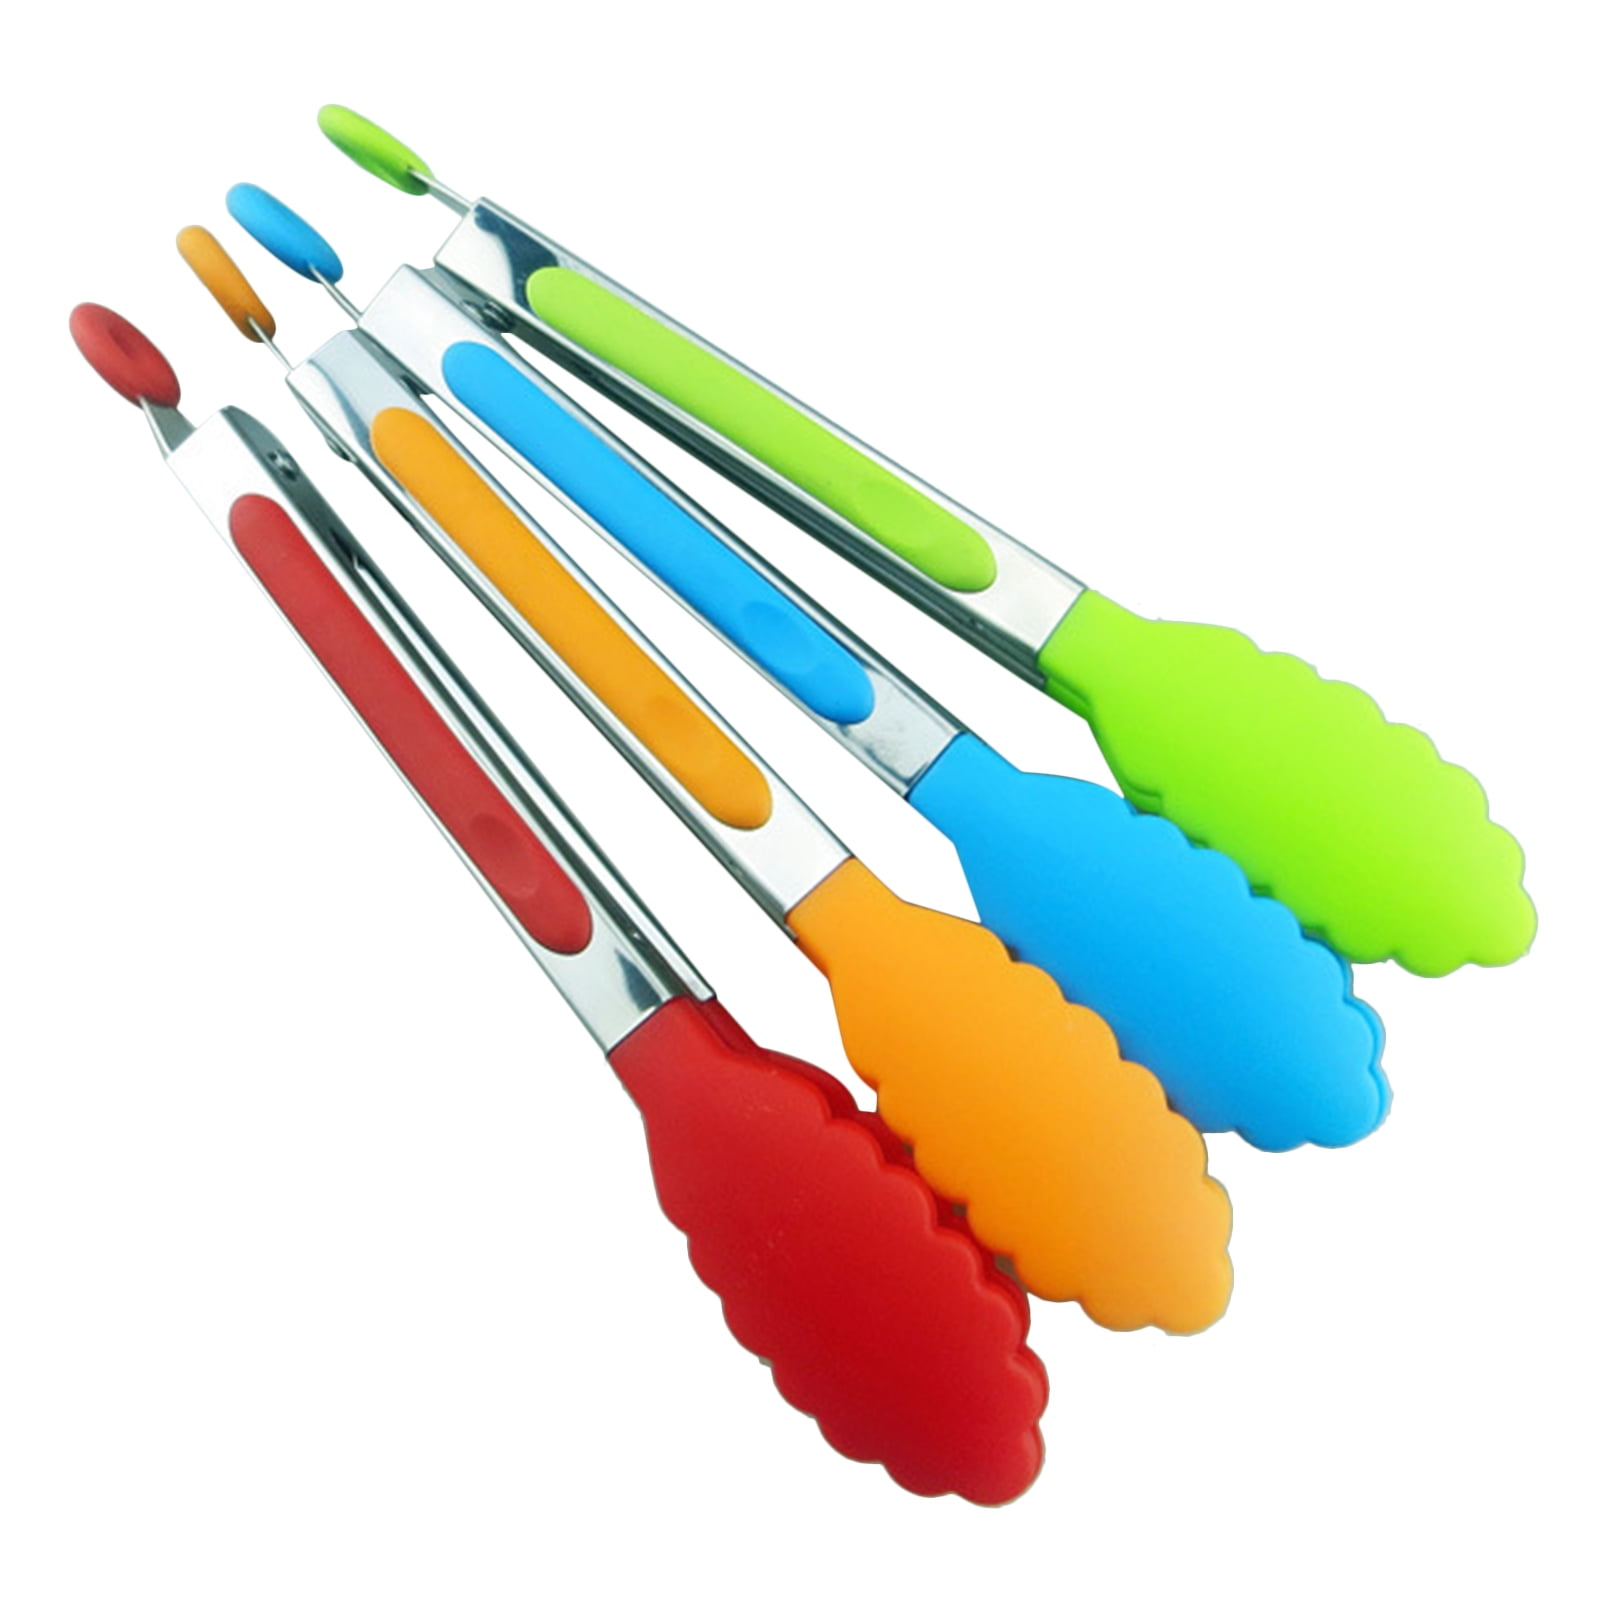 Himi Mini Tongs With Silicone Tips 7 Inch Silicone Cooking Tongs